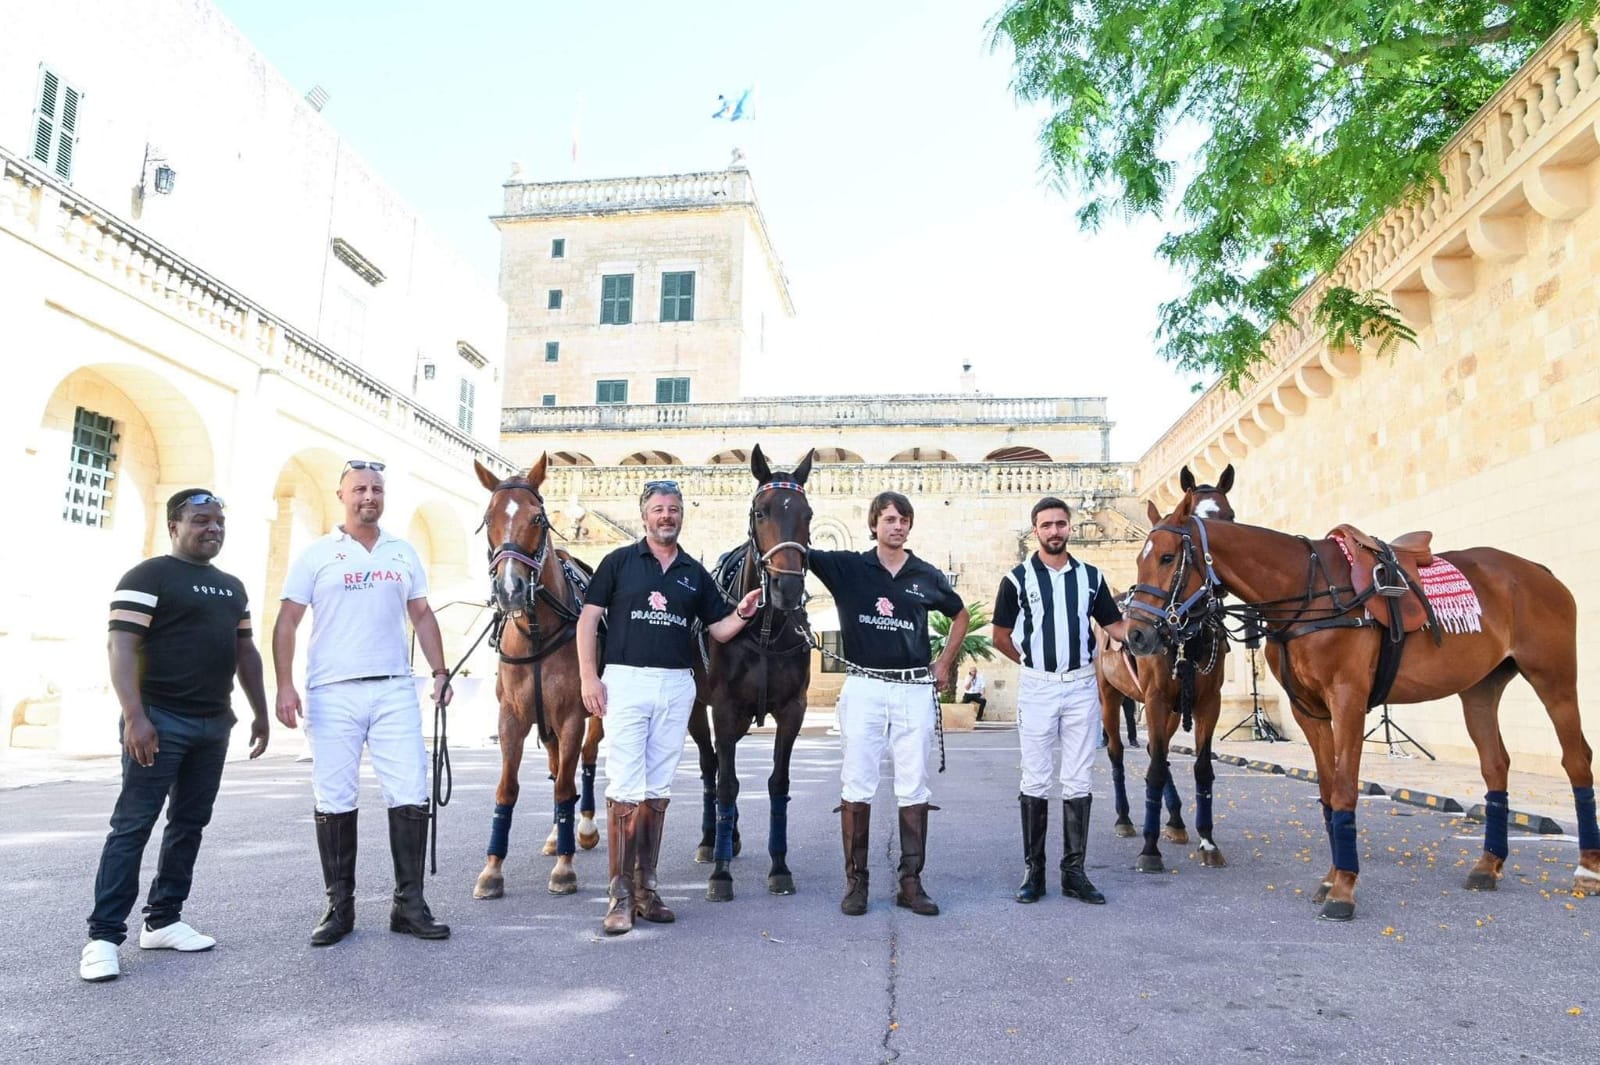 Launch of the EquestriMalta Cawnpore Cup